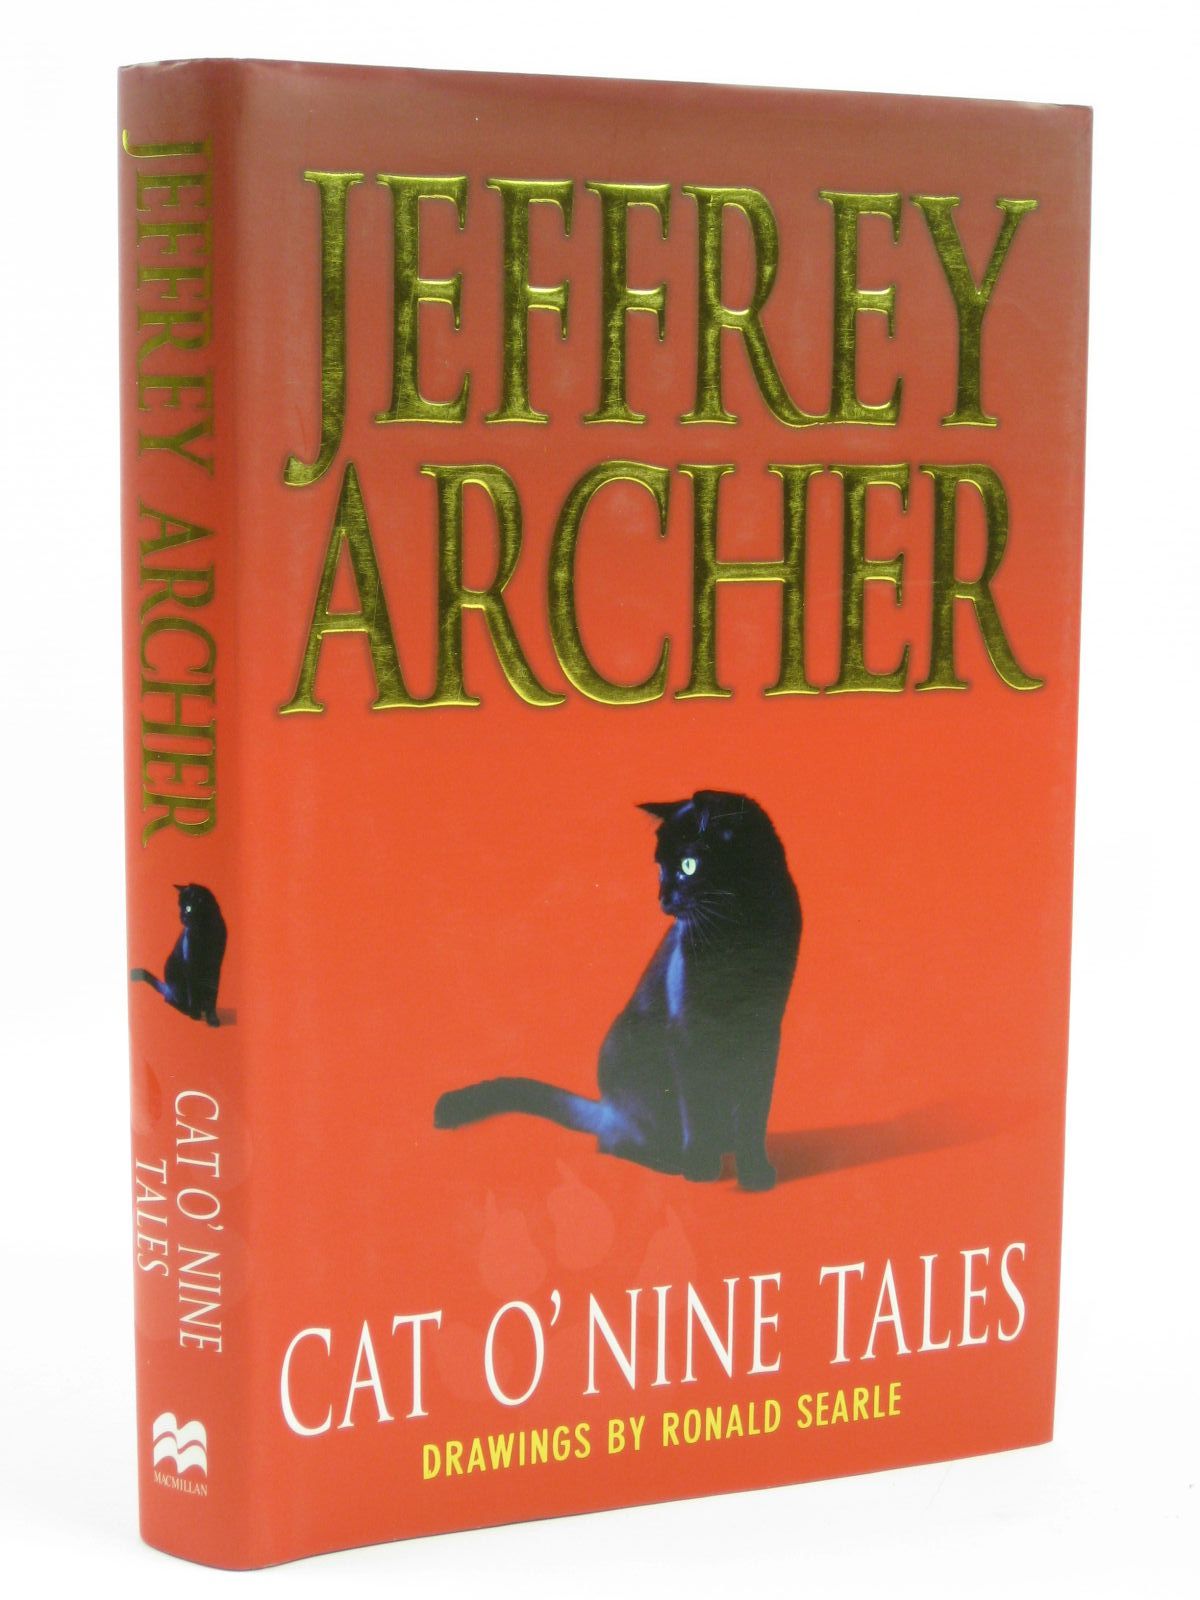 Photo of CAT O' NINE TALES written by Archer, Jeffrey illustrated by Searle, Ronald published by MacMillan (STOCK CODE: 1506689)  for sale by Stella & Rose's Books